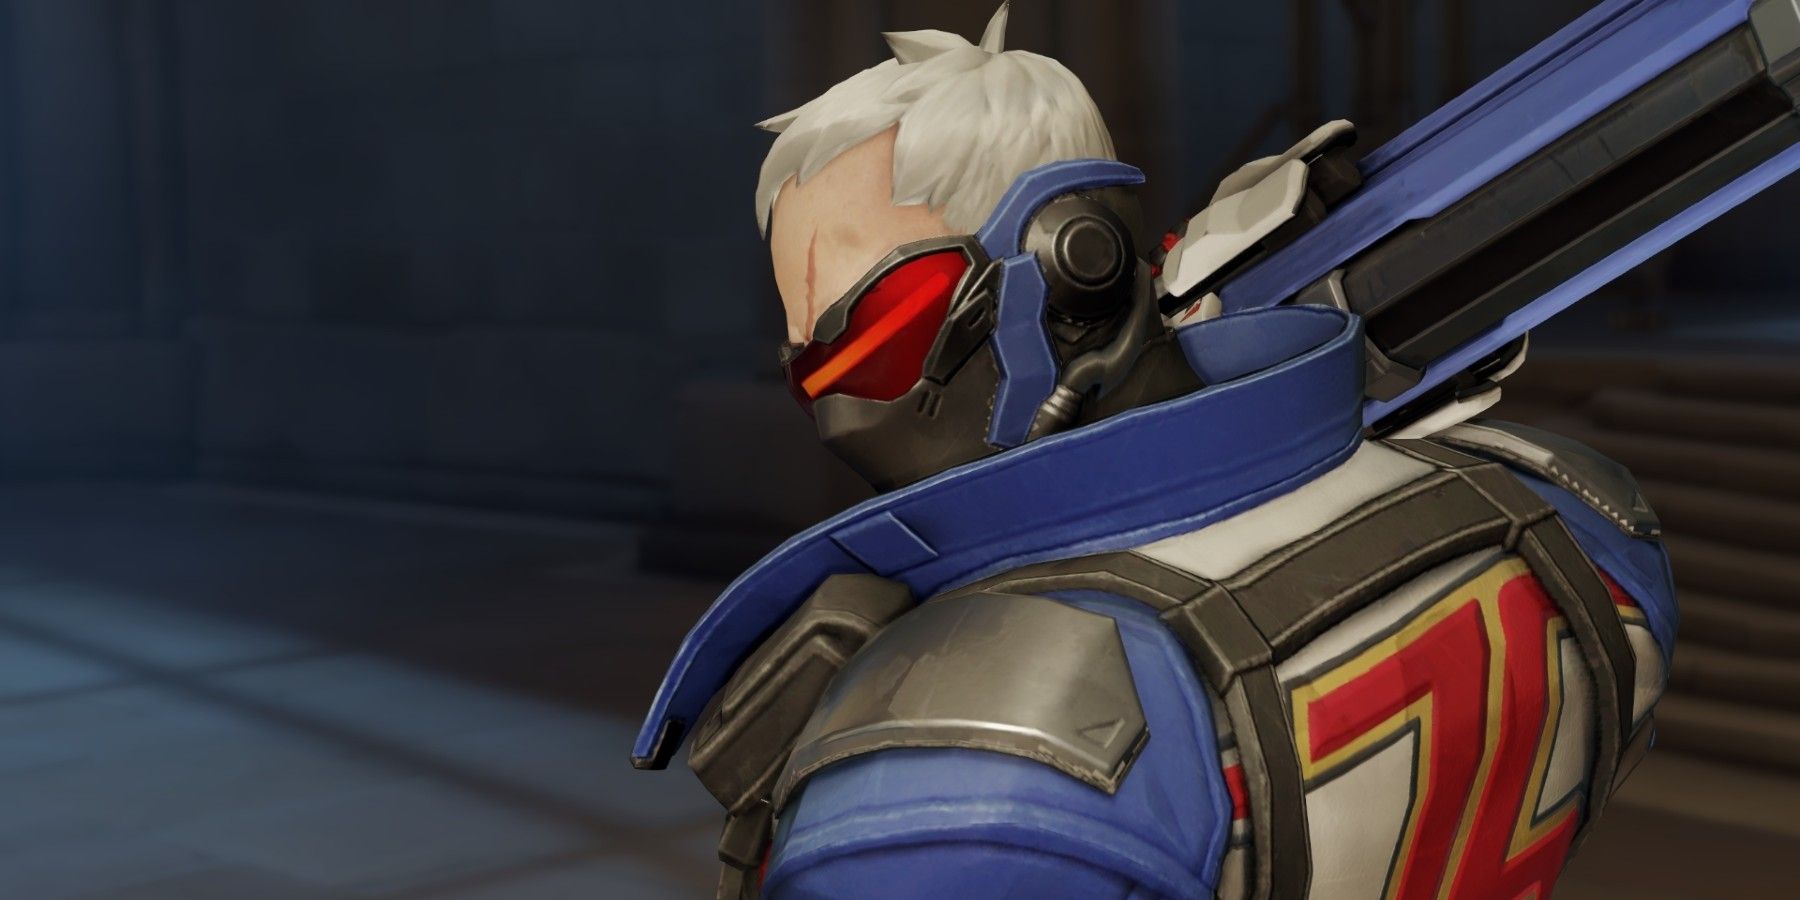 Ridiculous Overwatch Clip Shows Soldier 76 Surviving Reinhardt Pin on Rialto